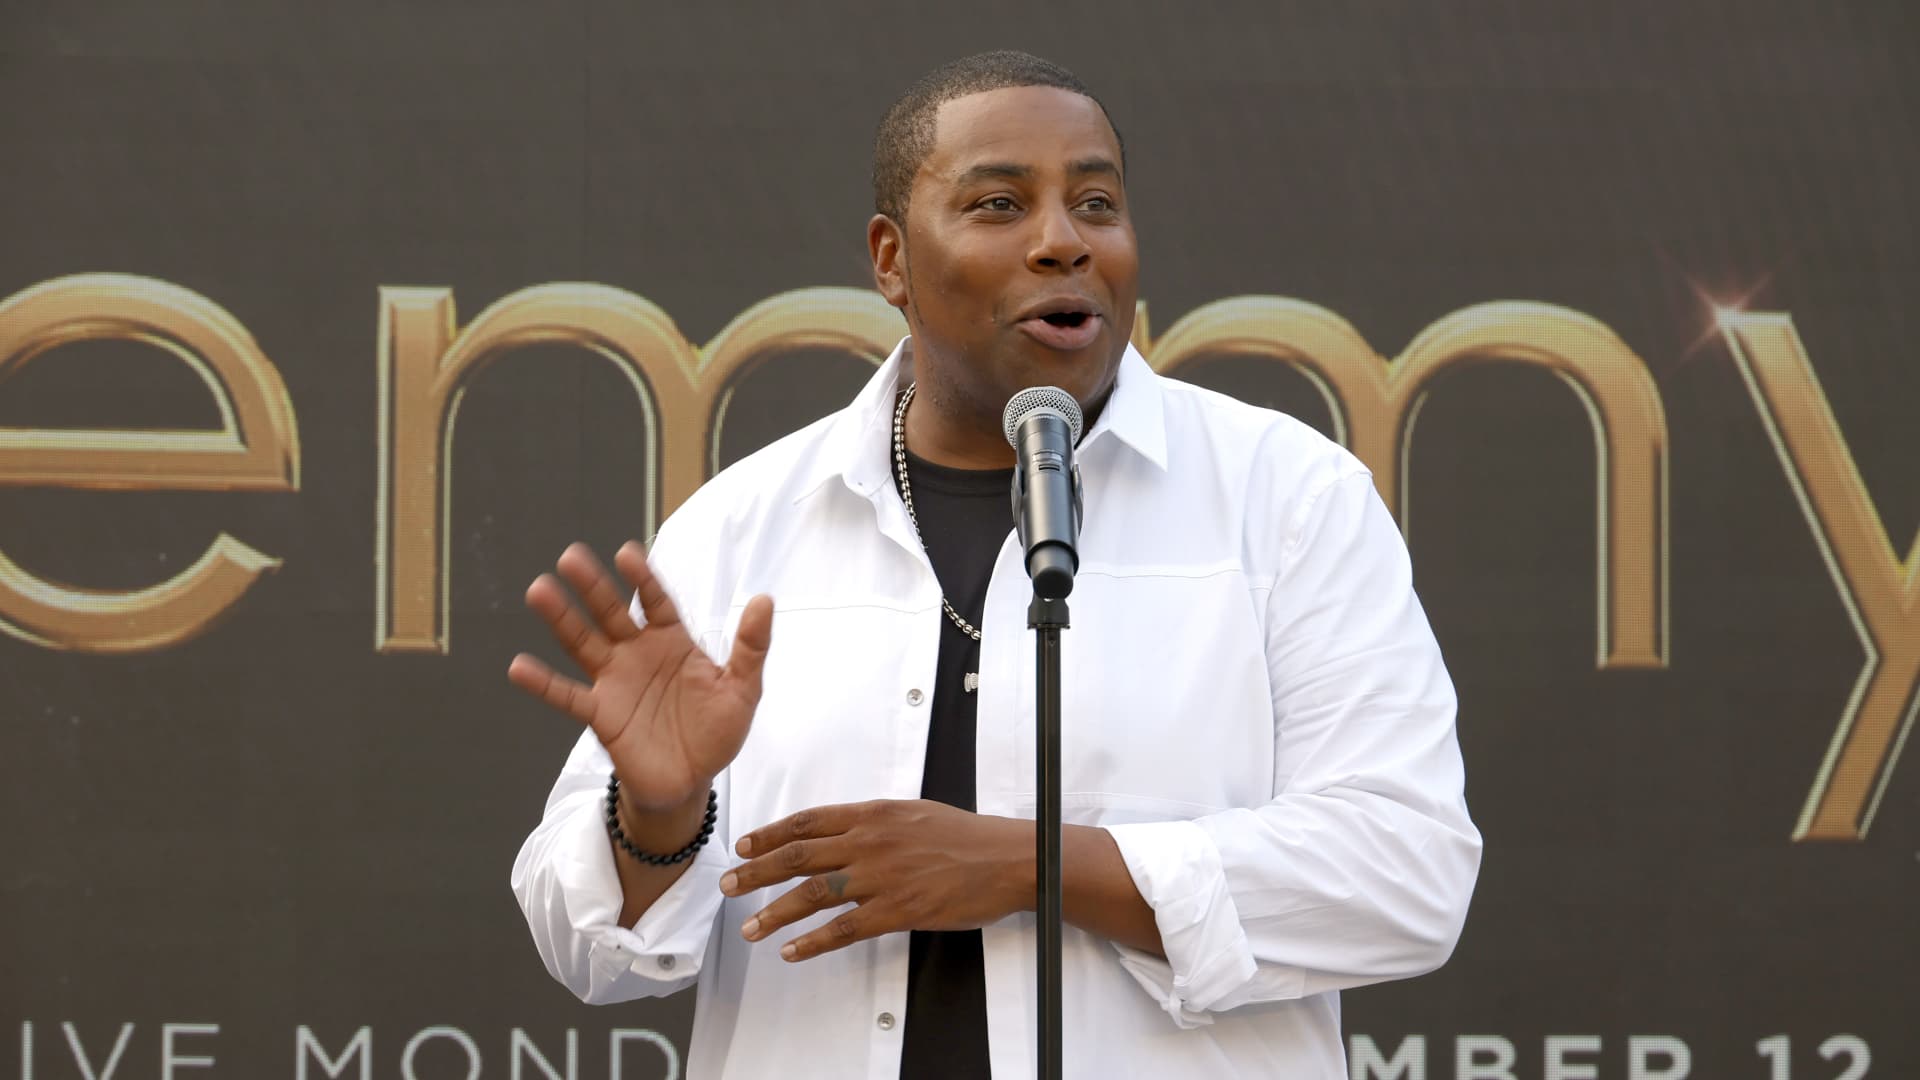 LOS ANGELES, CALIFORNIA - SEPTEMBER 08: Kenan Thompson speaks onstage during the 74th Primetime Emmys Press Preview at the Television Academy on September 08, 2022 in Los Angeles, California. (Photo by Frazer Harrison/Getty Images)